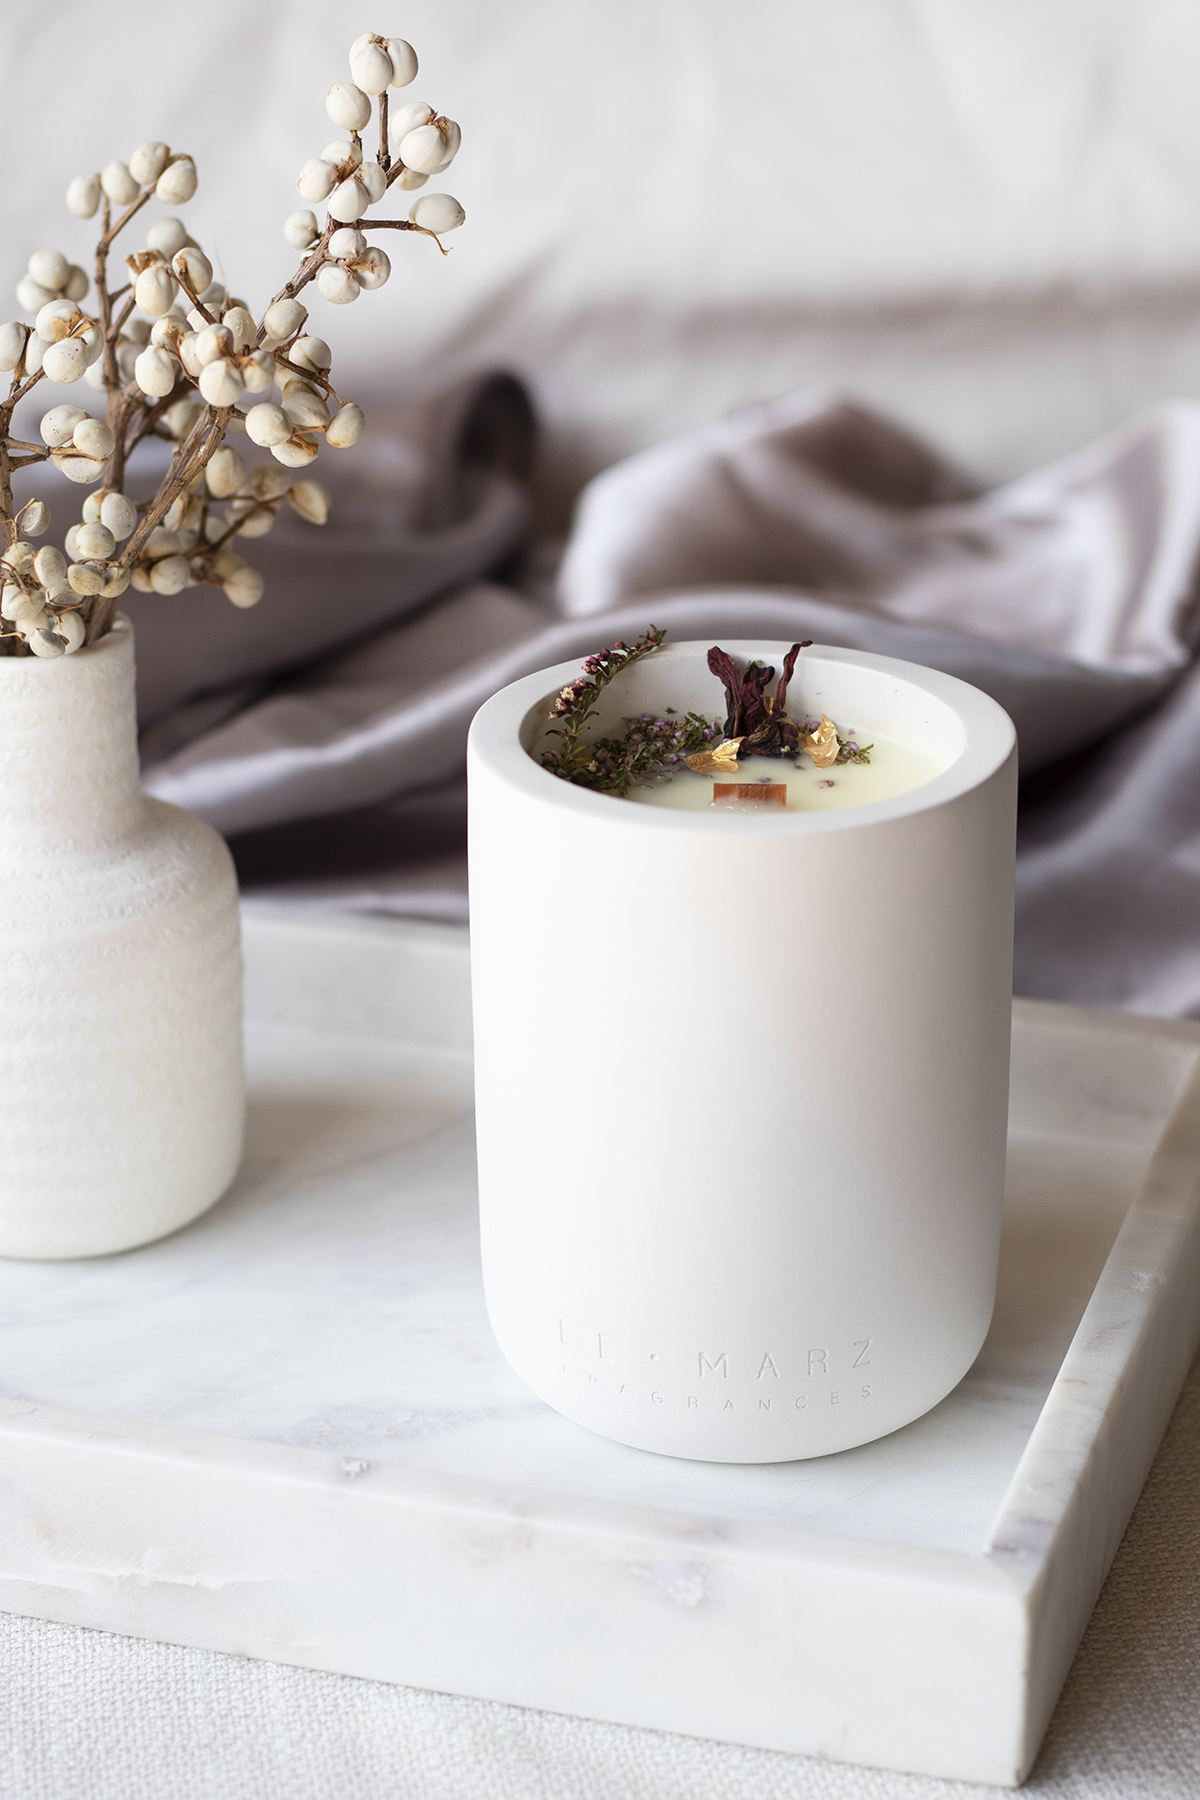 Japanese Honeysuckle candle, wood wick, gift ideas, concrete candles, house warming gift, luxury candles, pretty candles, wood wick candle, candles, white concrete candle